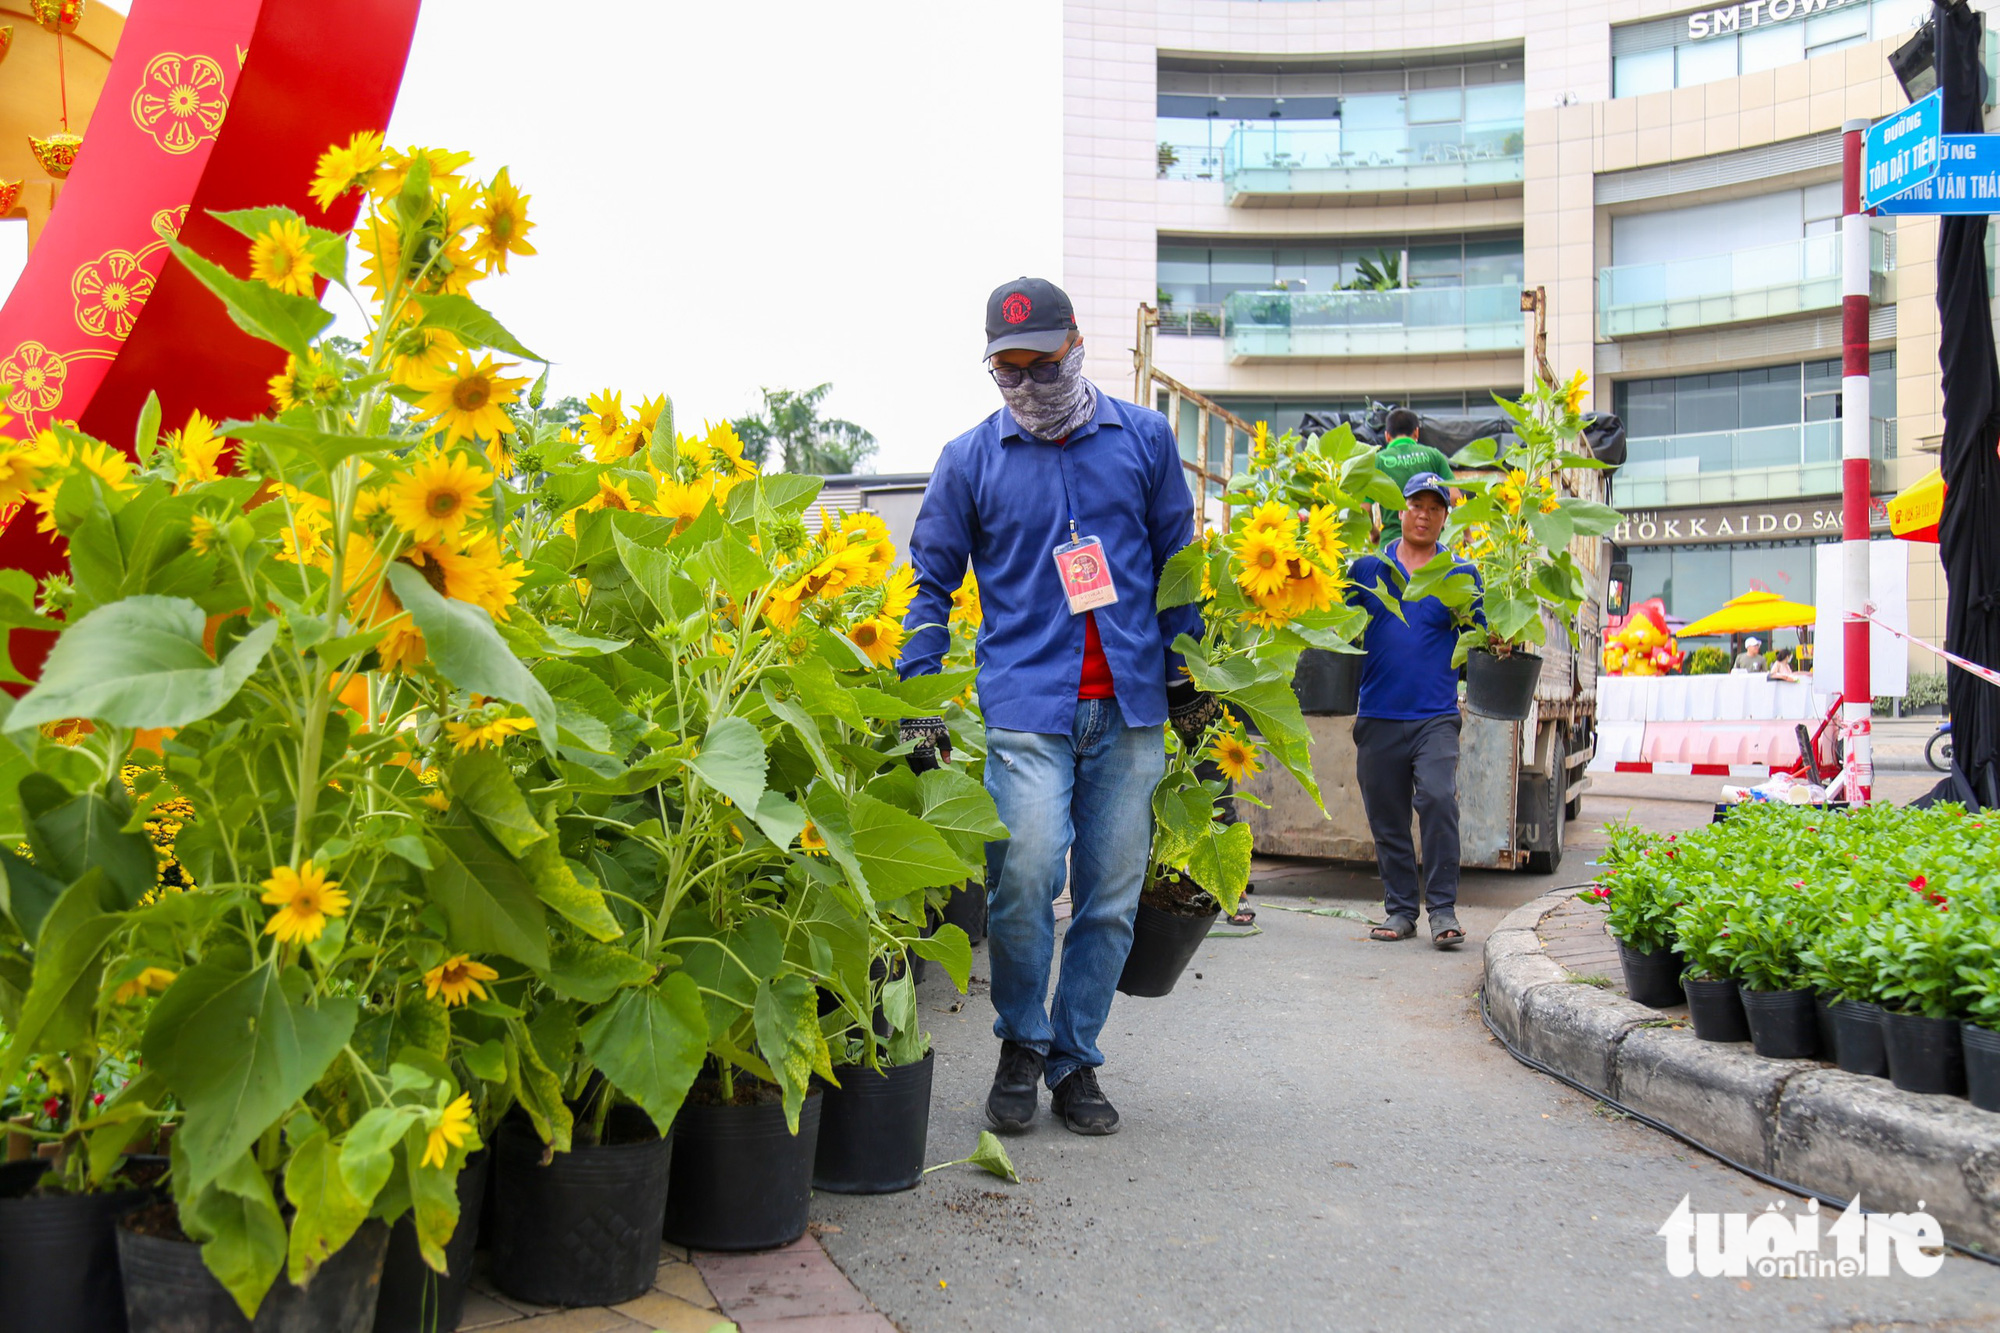 Flower pots are continuously transported to the flower road so that workers can complete miniatures before the official opening of the flower festival. Photo: Phuong Quyen / Tuoi Tre